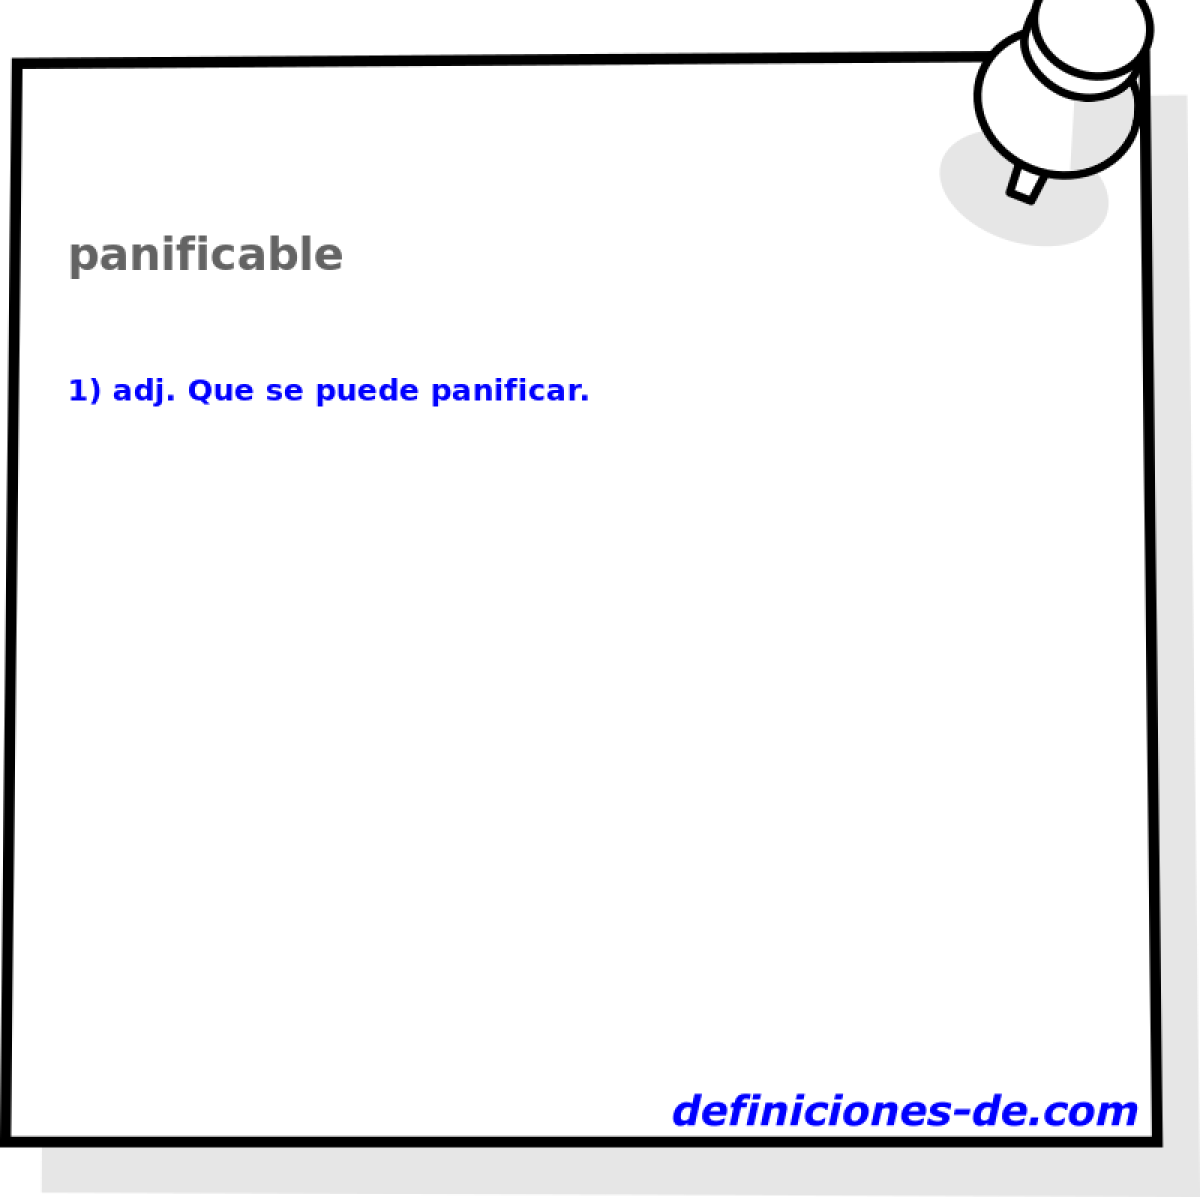 panificable 